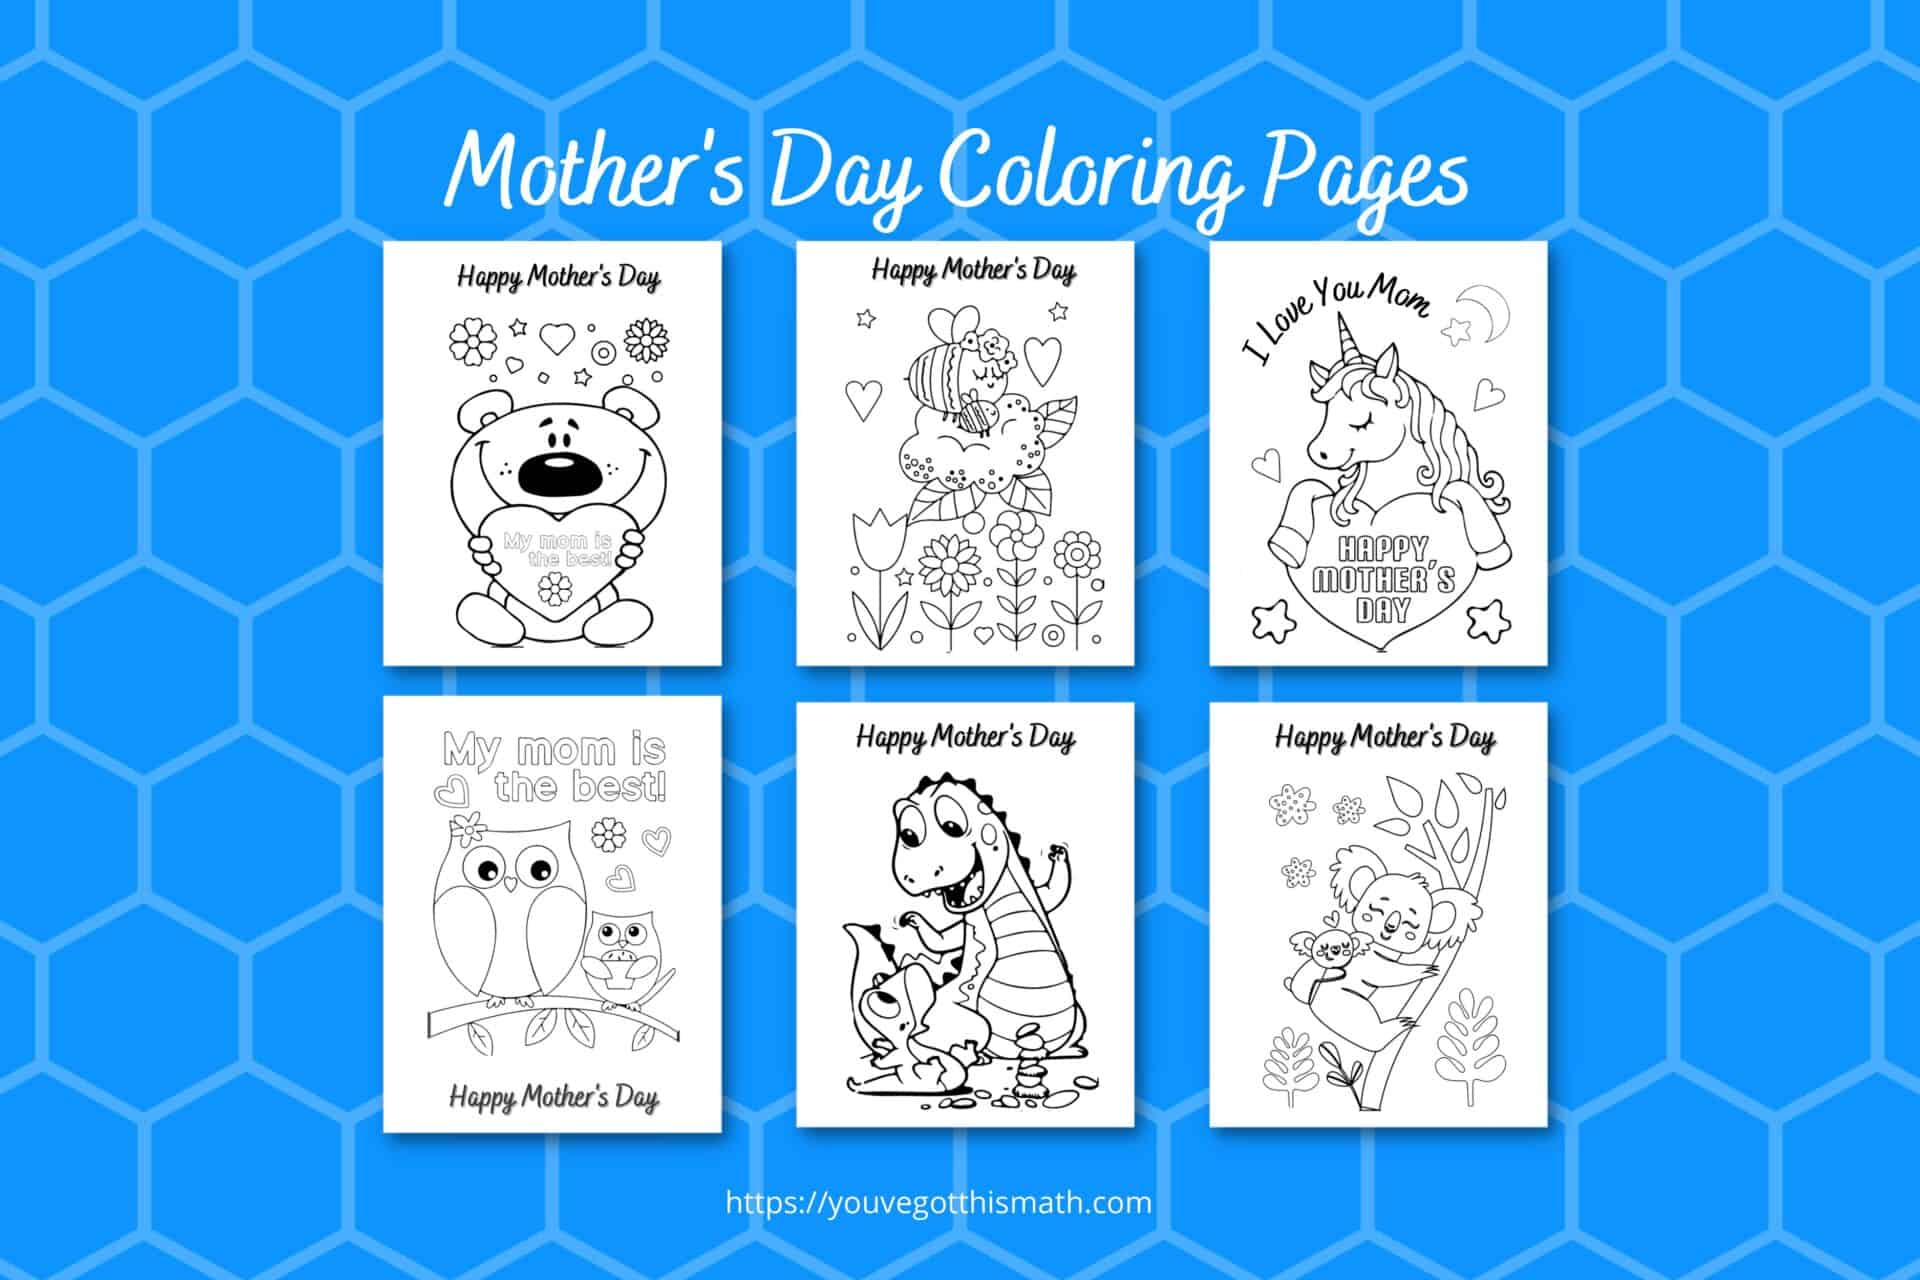 flat lay showing various mother's day coloring pages